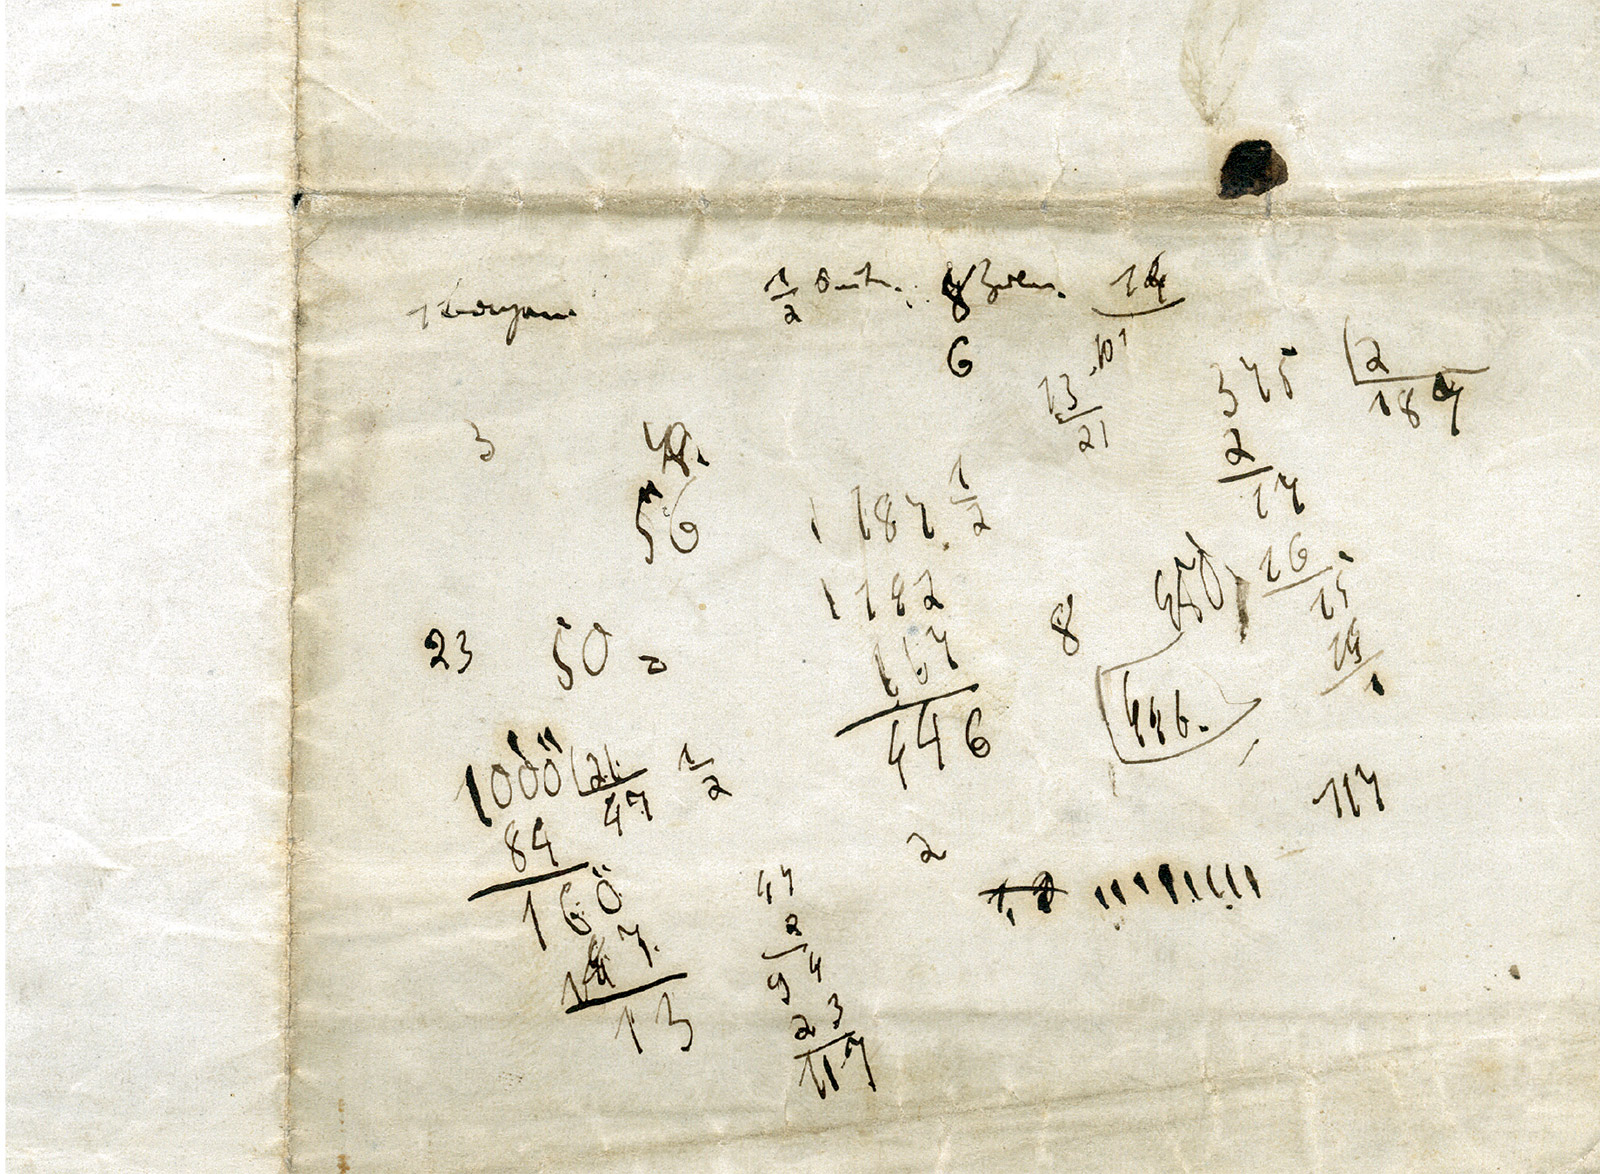 A postcard depicting a page of calculations scribbled on a piece of paper.